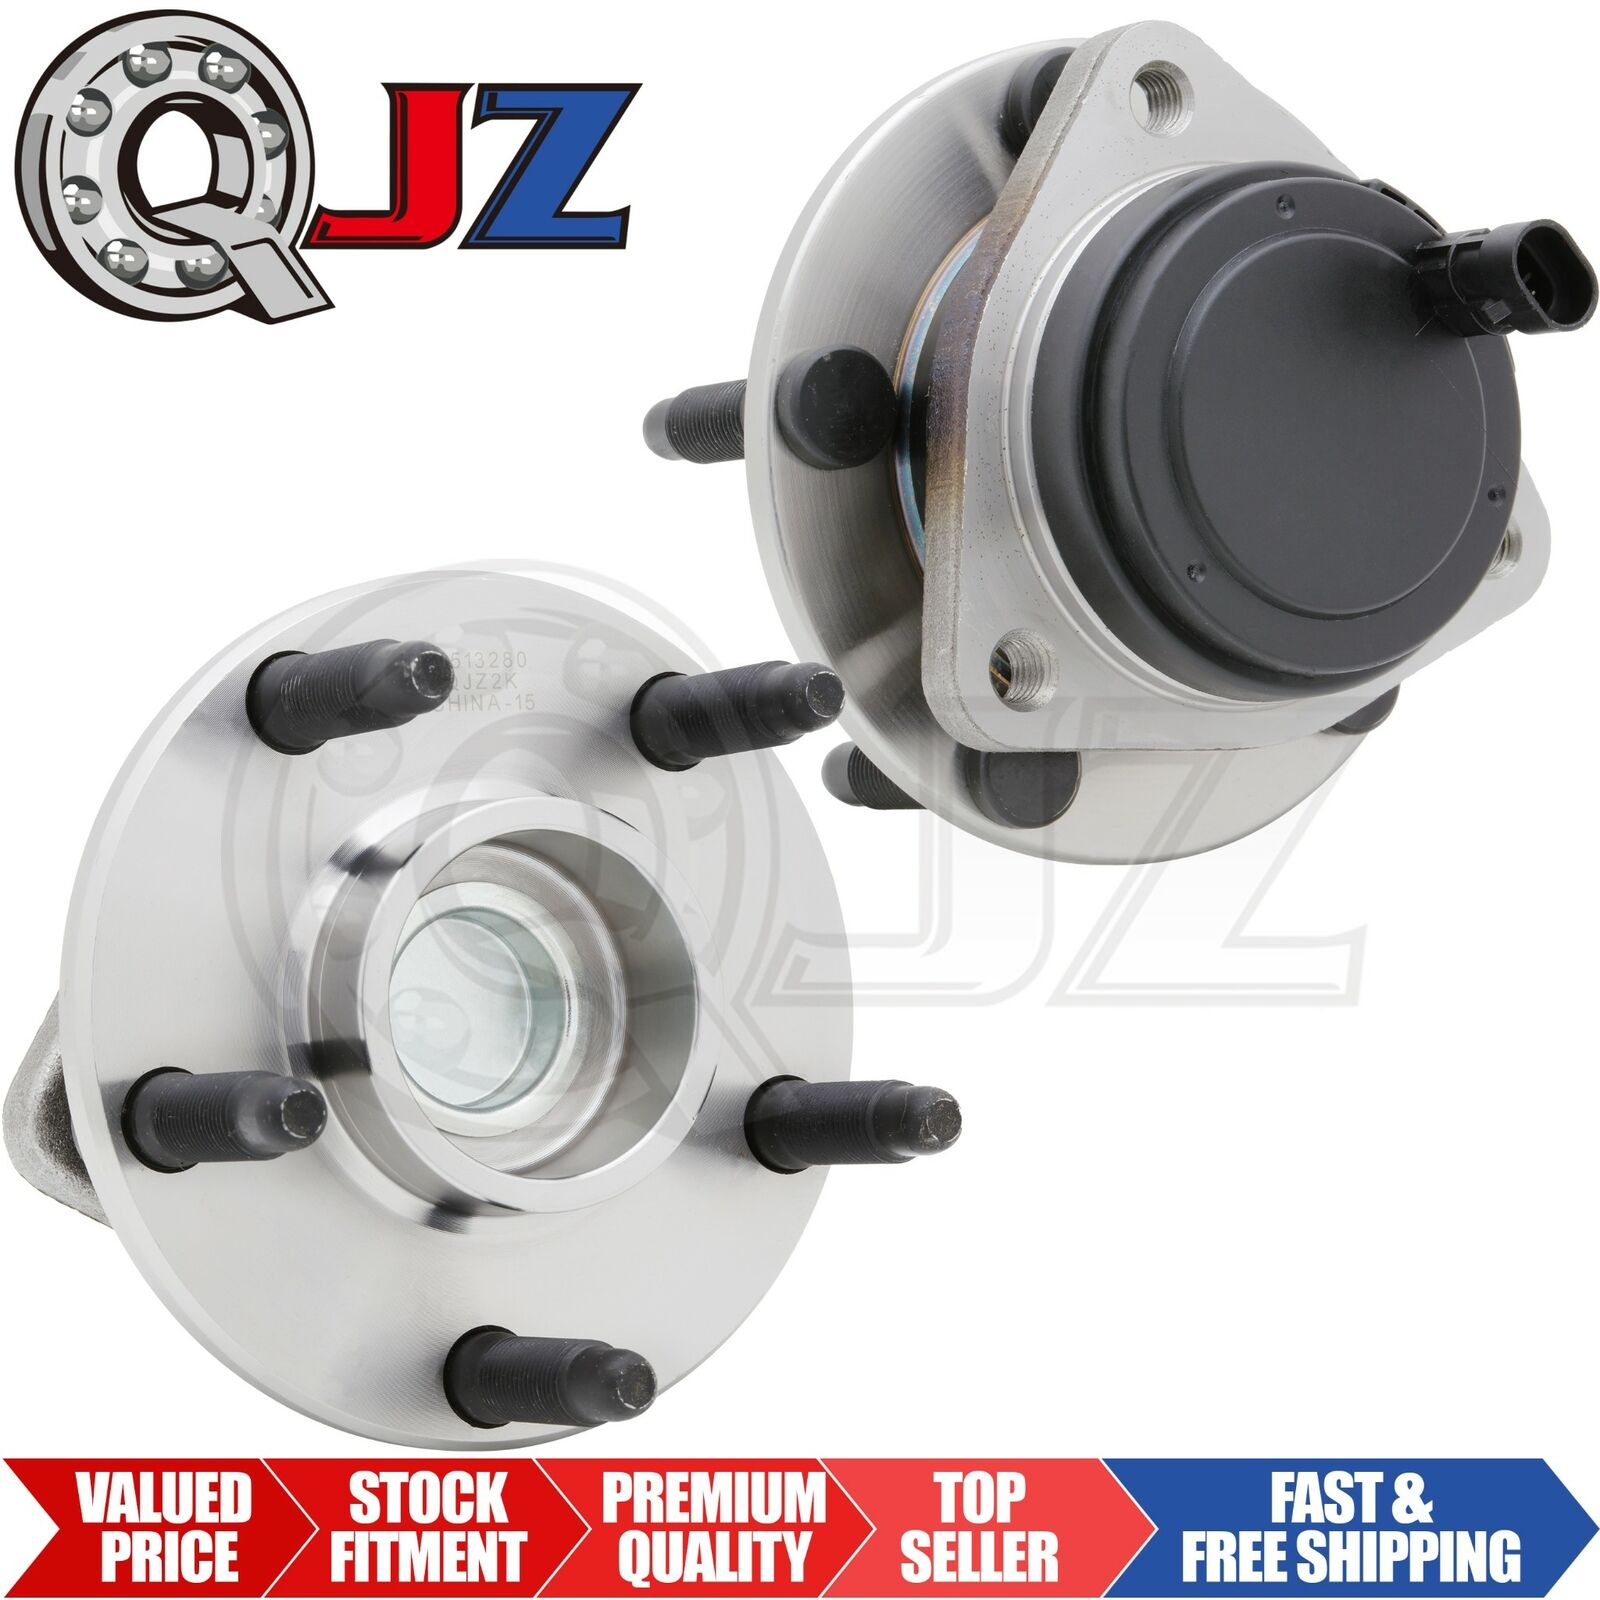 [2-Pack] 513280 FRONT Wheel Hub Replacement for Chevrolet Caprice Pontiac G8 RWD